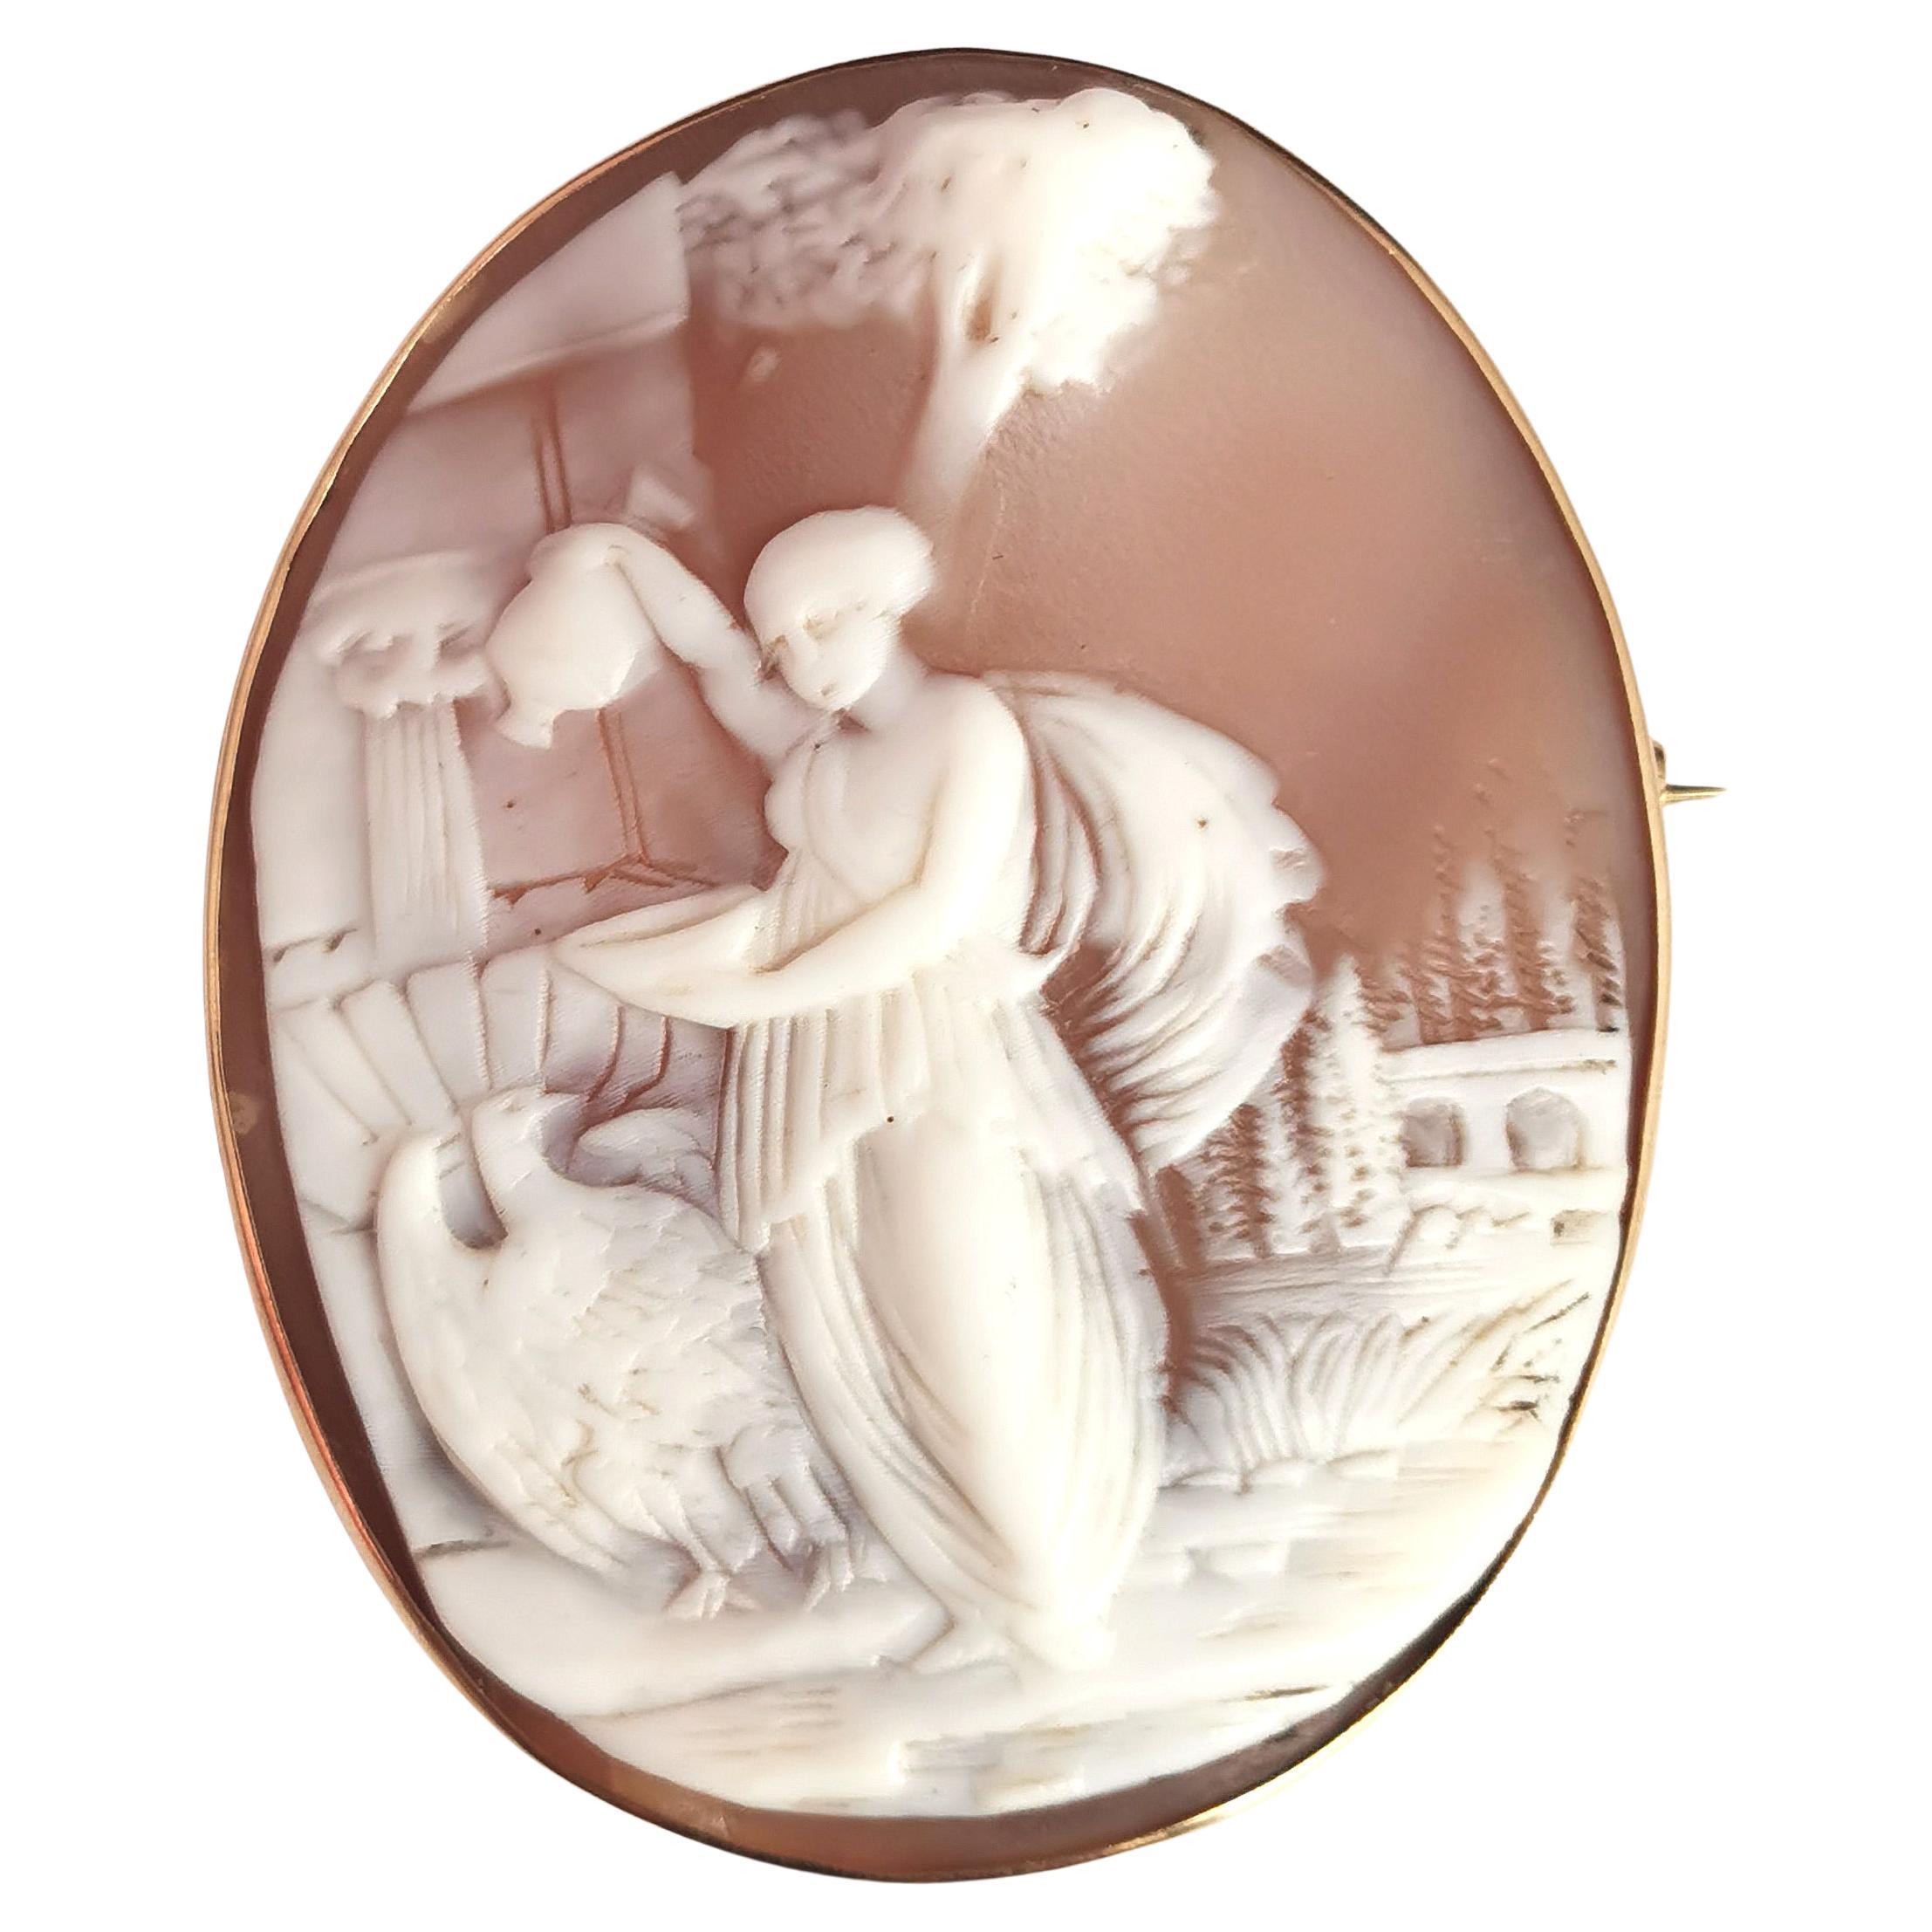 Antique Cameo Brooch, 9k Gold, Hebe and the Eagle